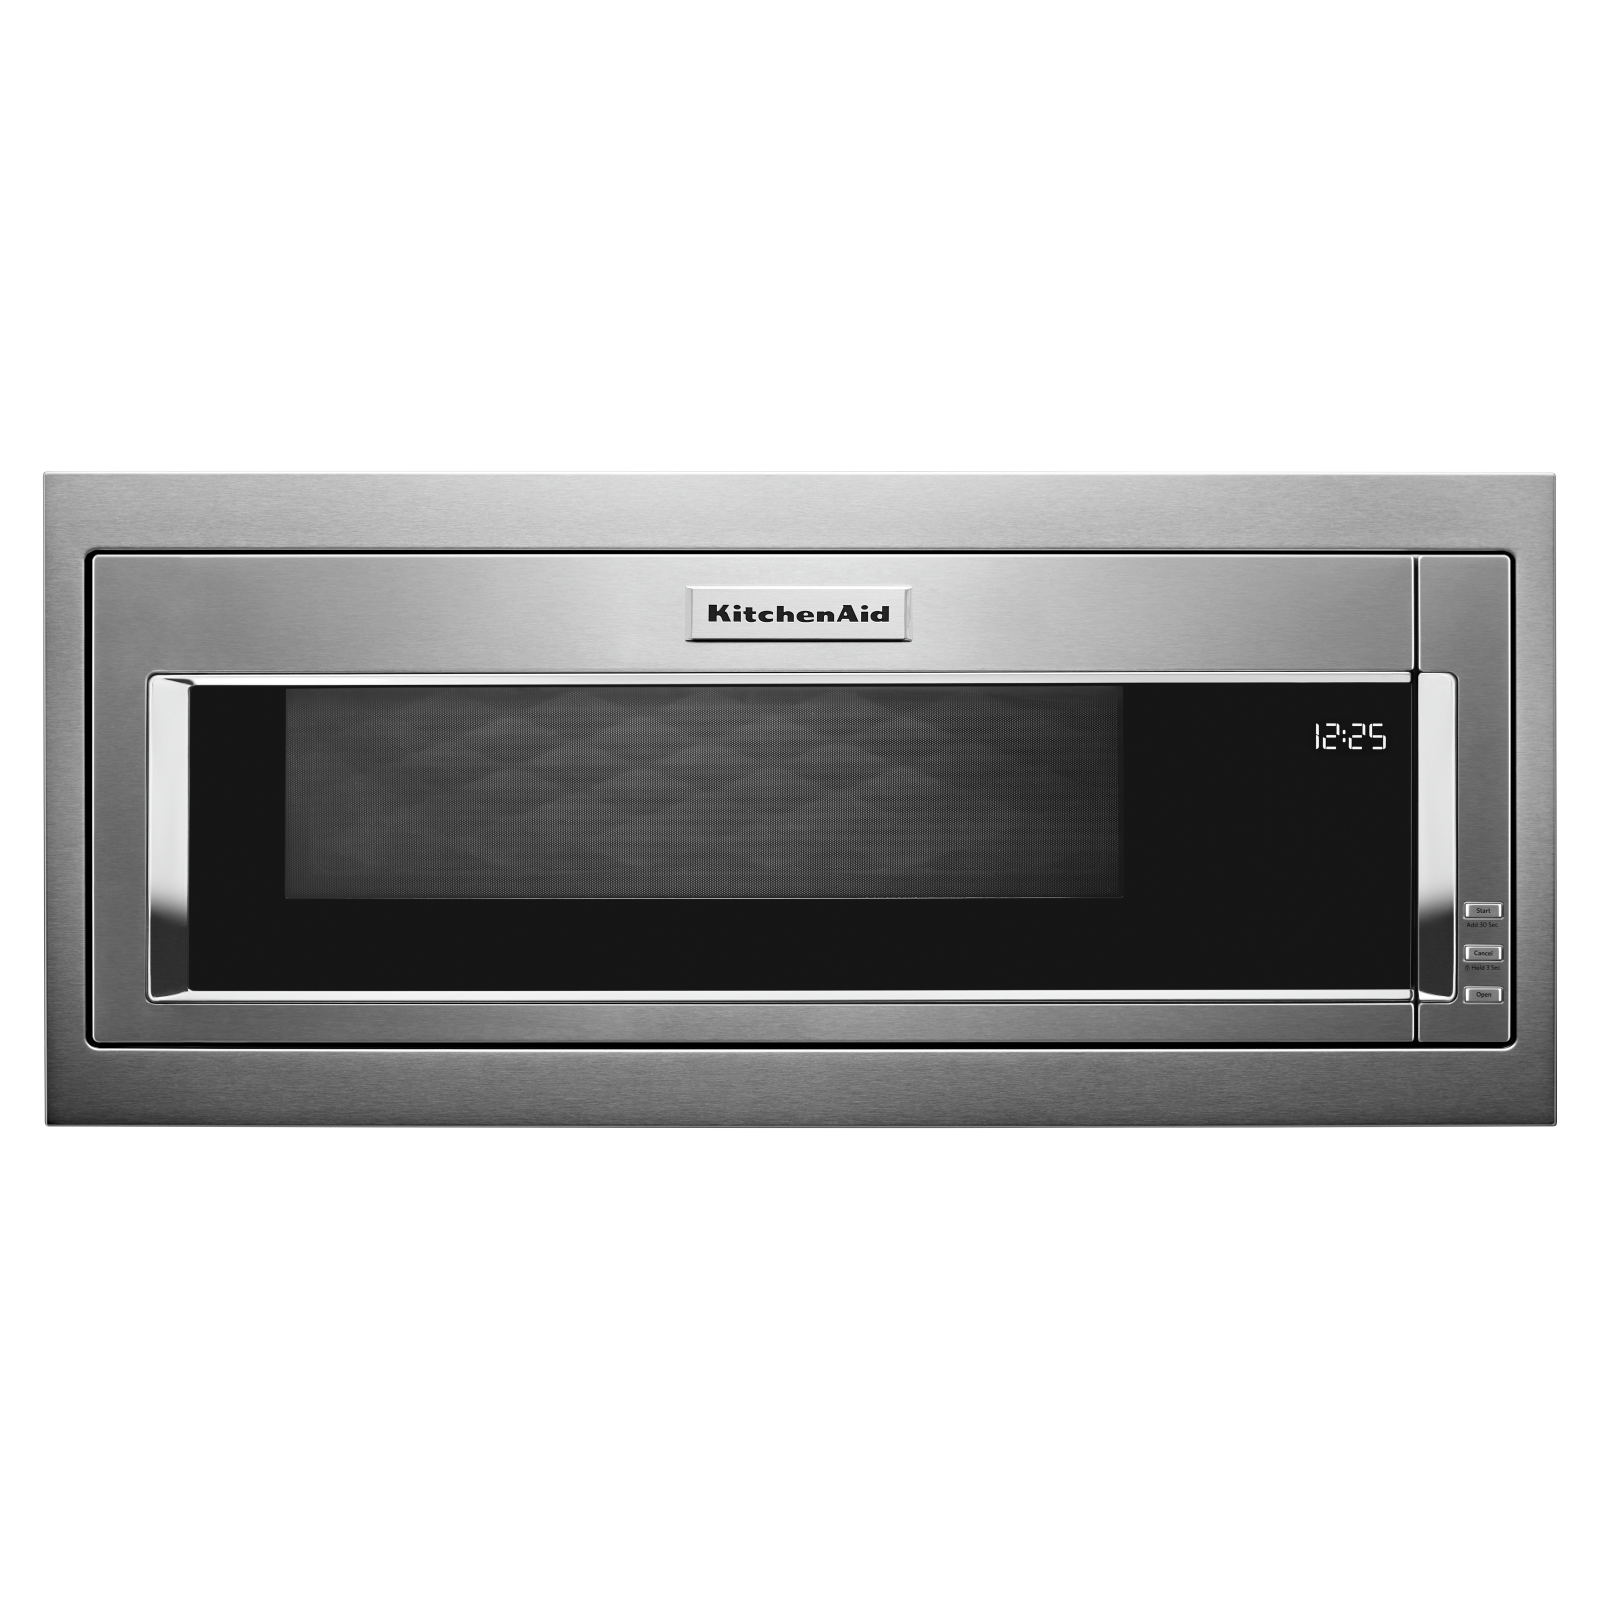 KitchenAid - 1.1 cu. Ft  Built In Microwave in Stainless - YKMBT5011KS